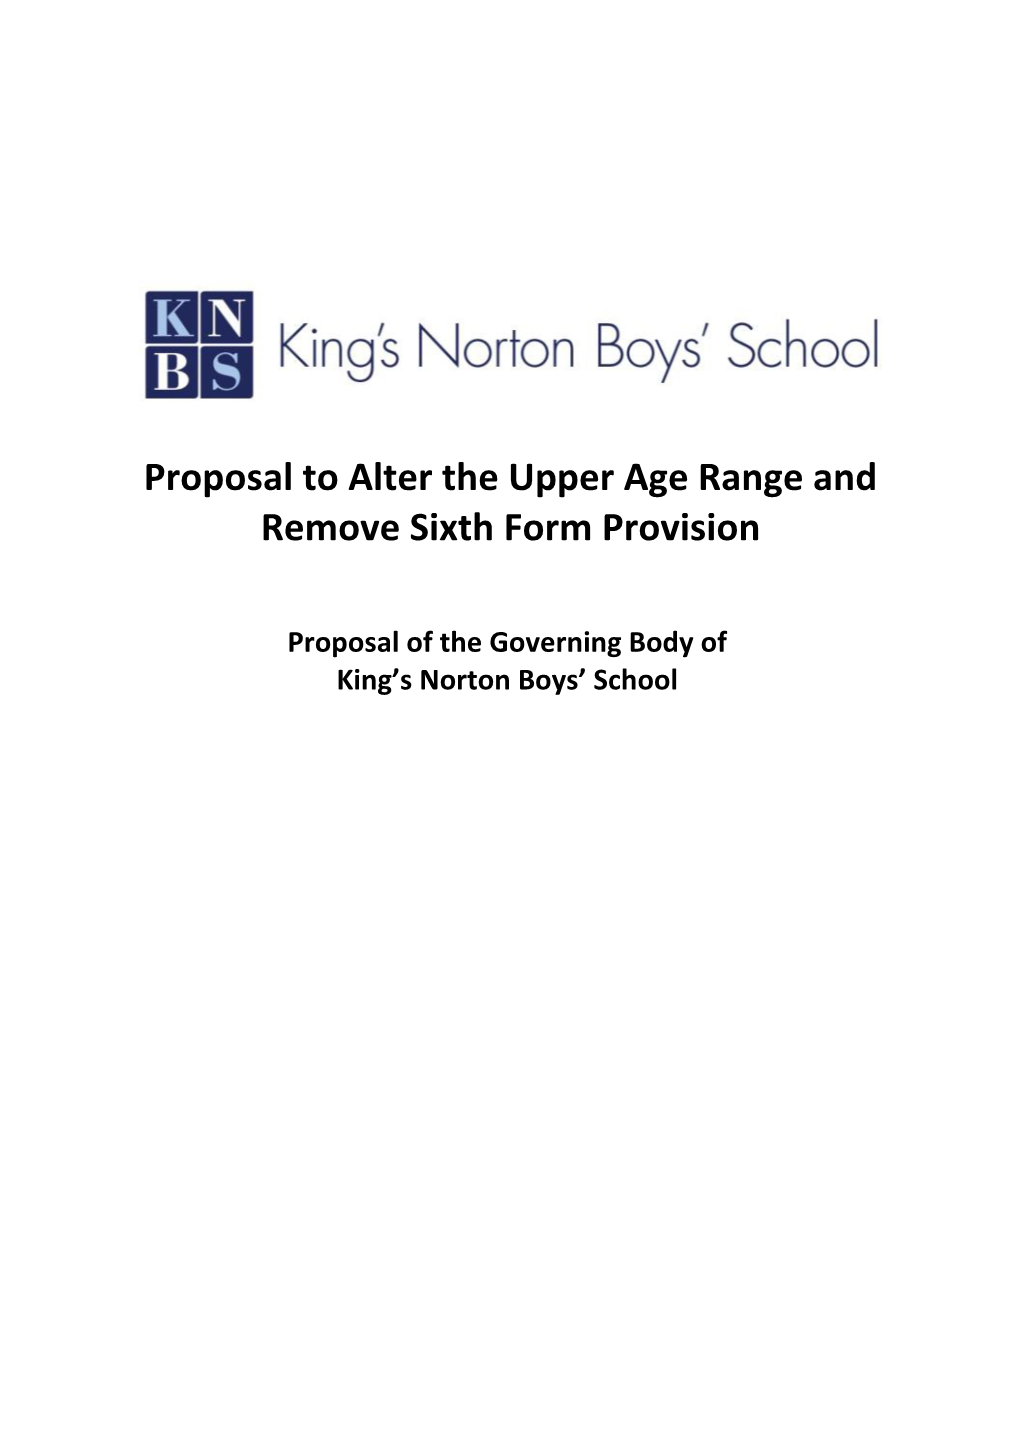 Proposal to Alter the Upper Age Range and Remove Sixth Form Provision